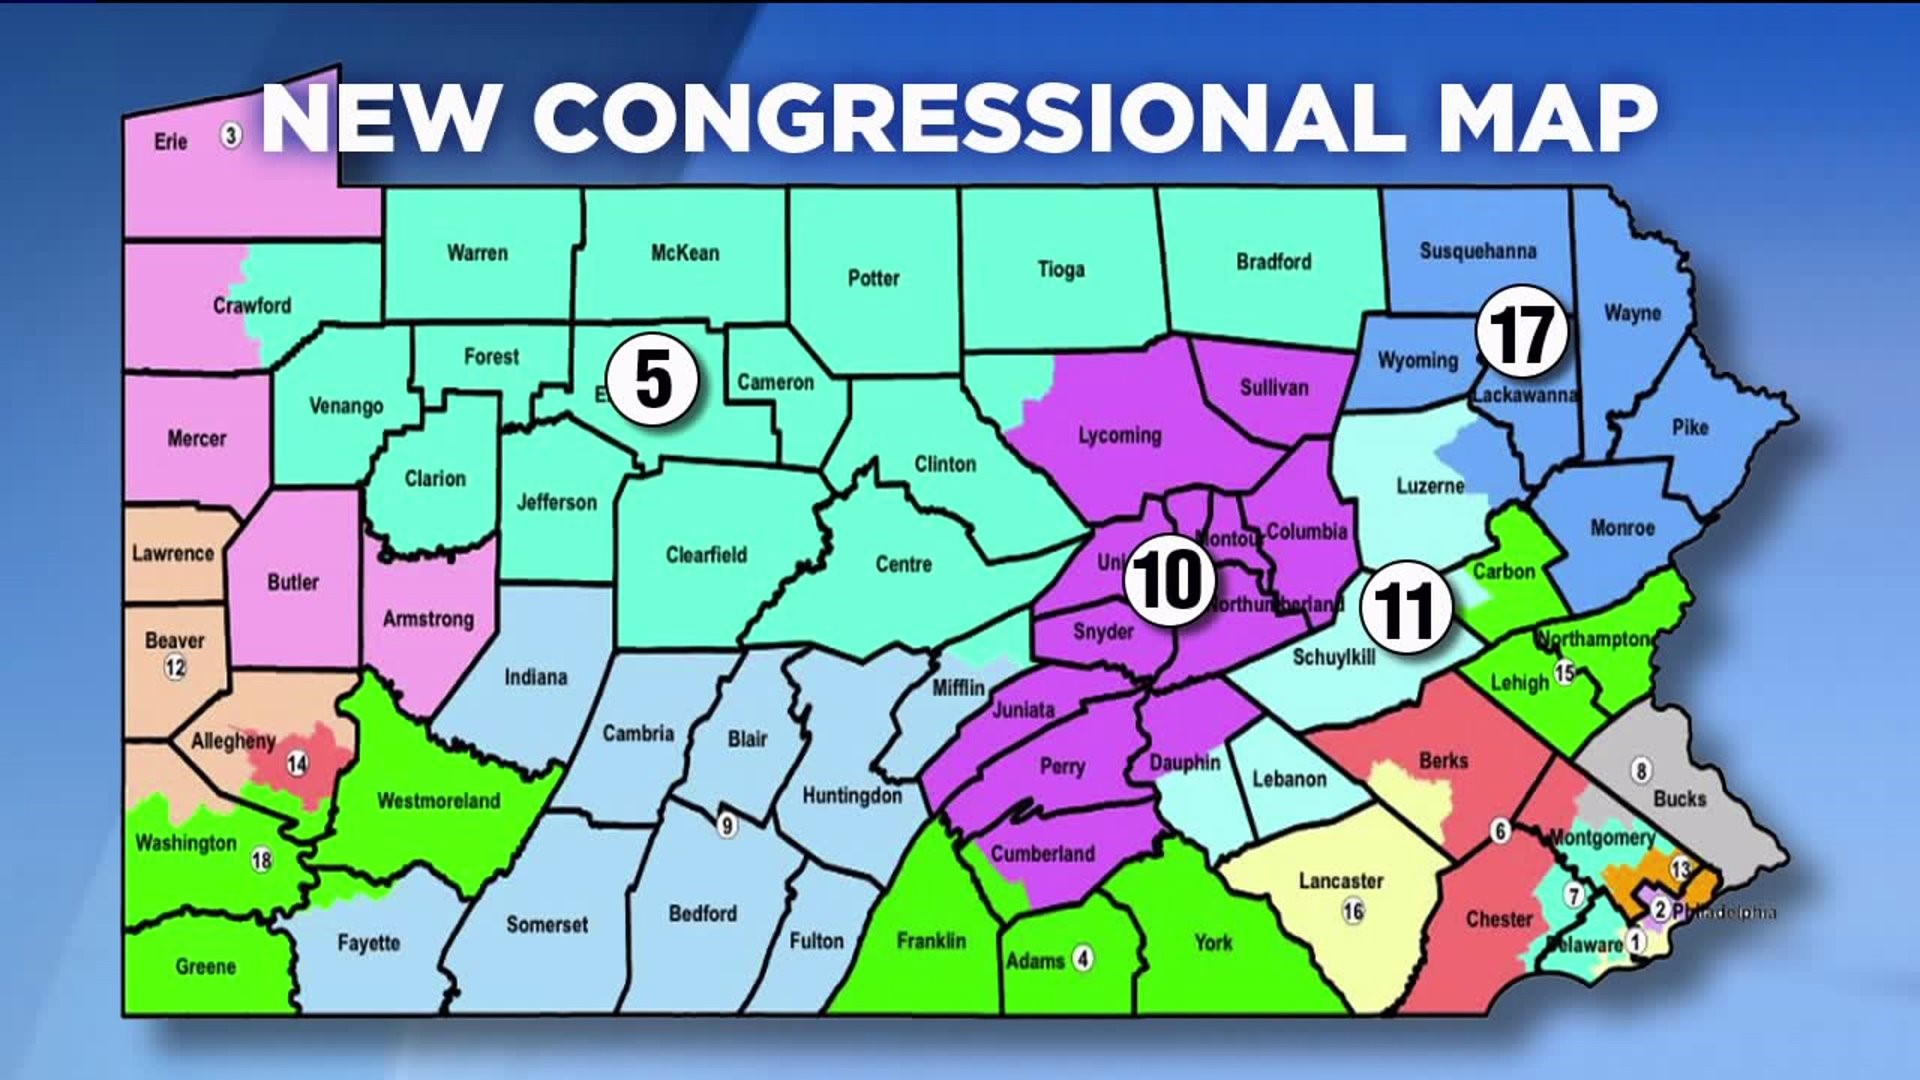 Governor Wolf to Examine New PA Congressional Maps